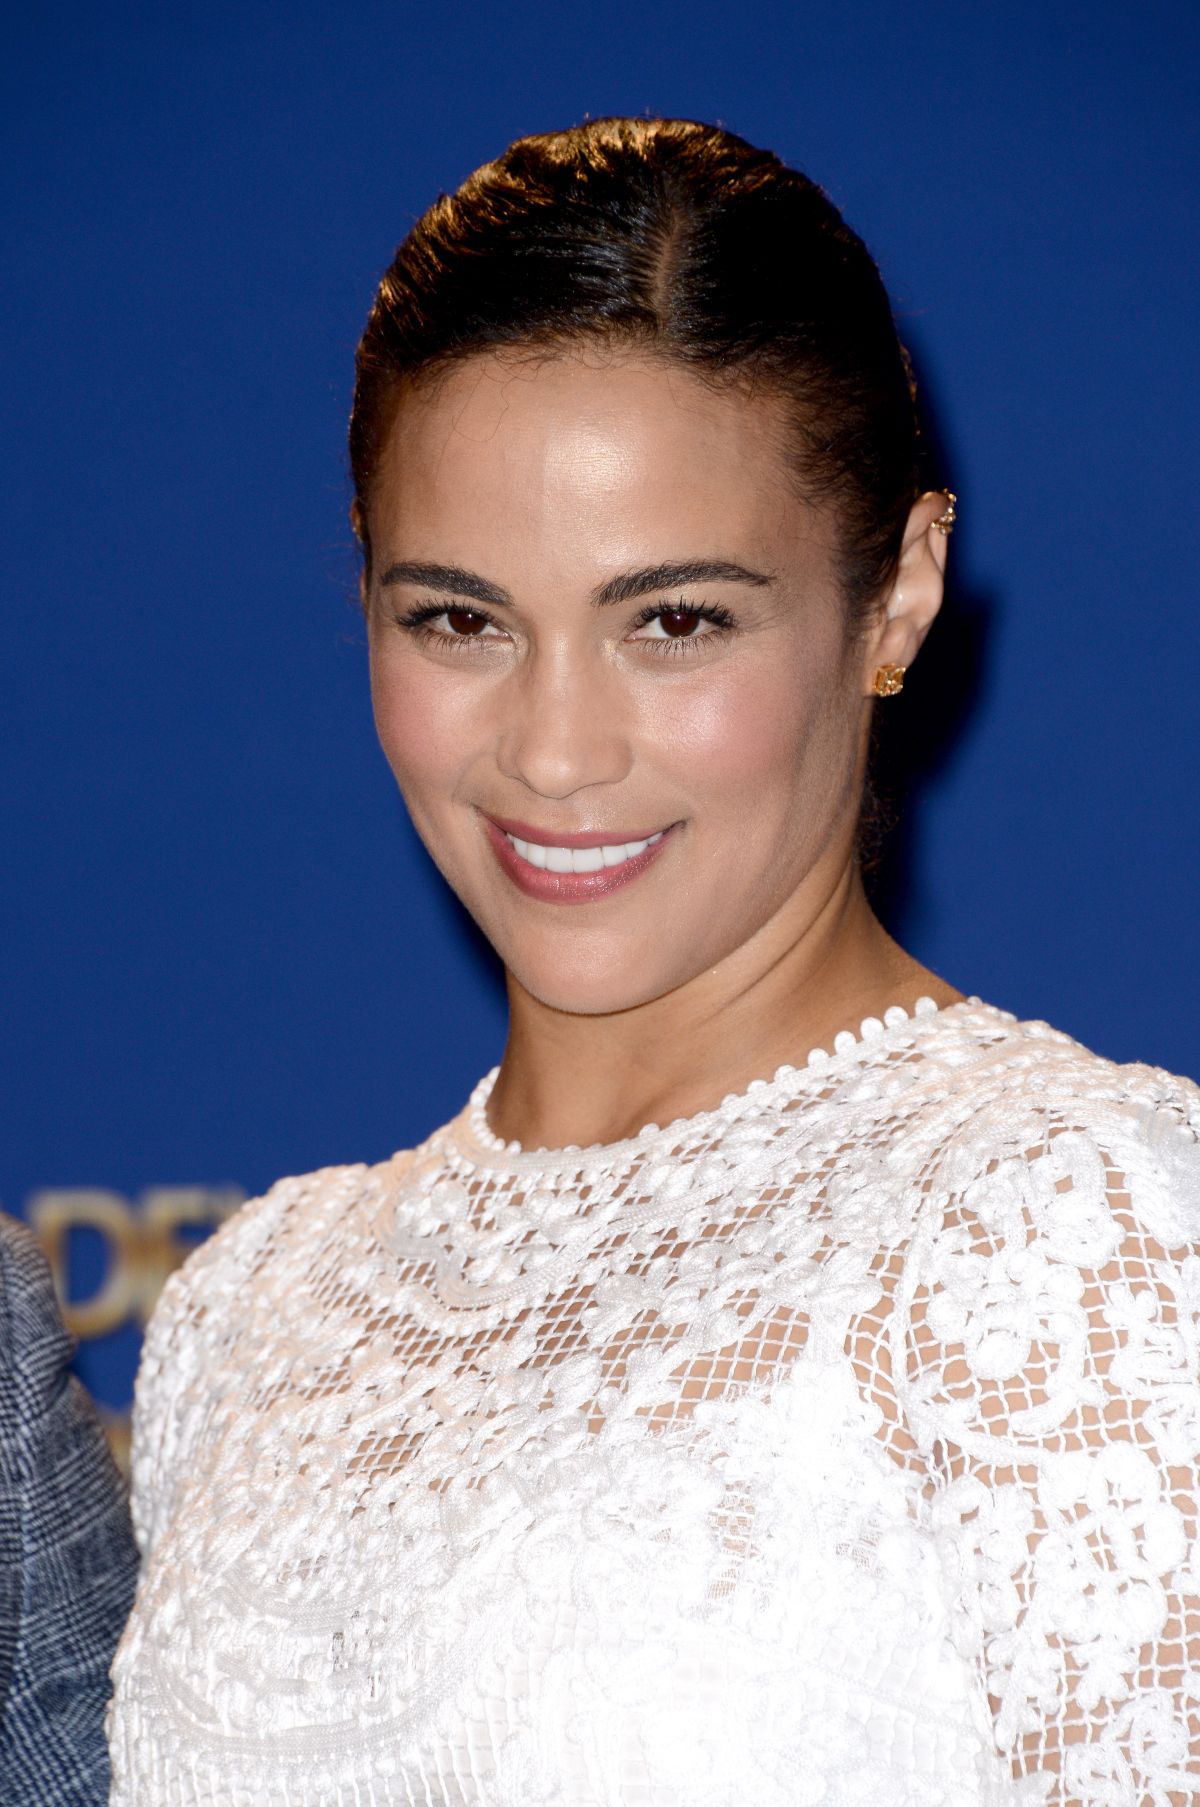 PAULA PATTON at 72nd Annual Golden Globe Awards Nominations Announcement in Los Angeles